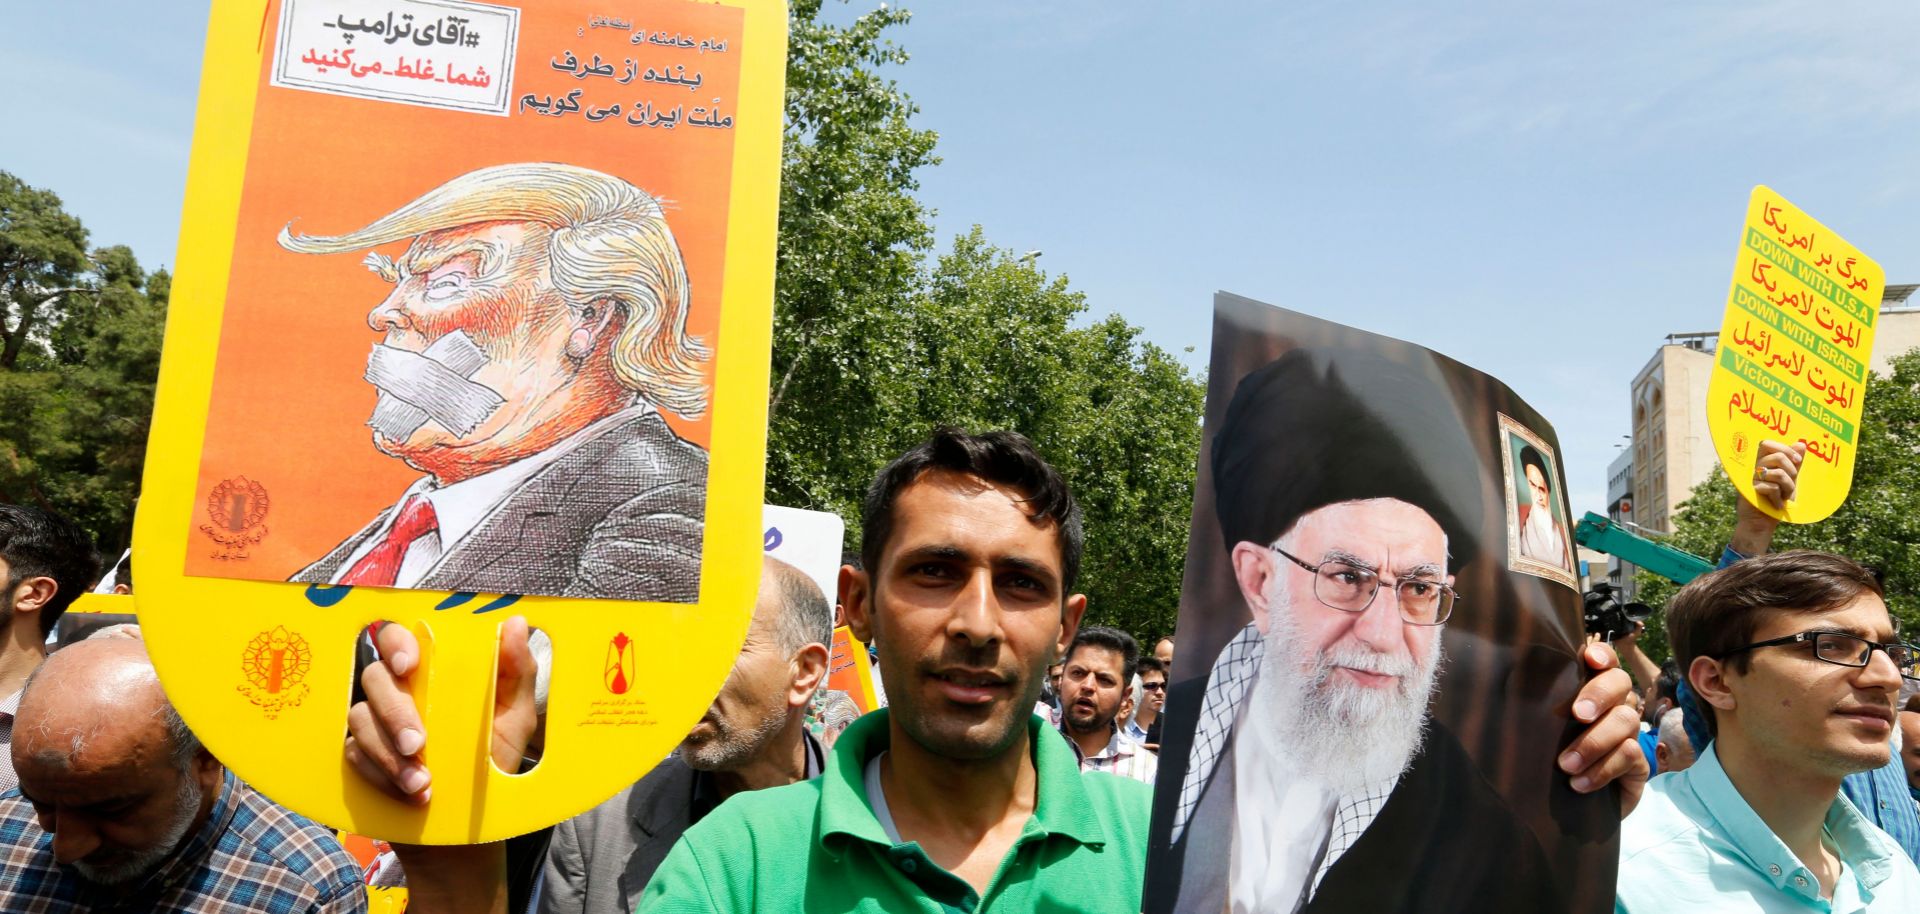 A protester holds a banner criticizing U.S. President Donald Trump and a portrait lauding Iranian Supreme Leader Ali Khamanei during an anti-U.S. demonstration in Tehran after Friday prayers on May 11. 